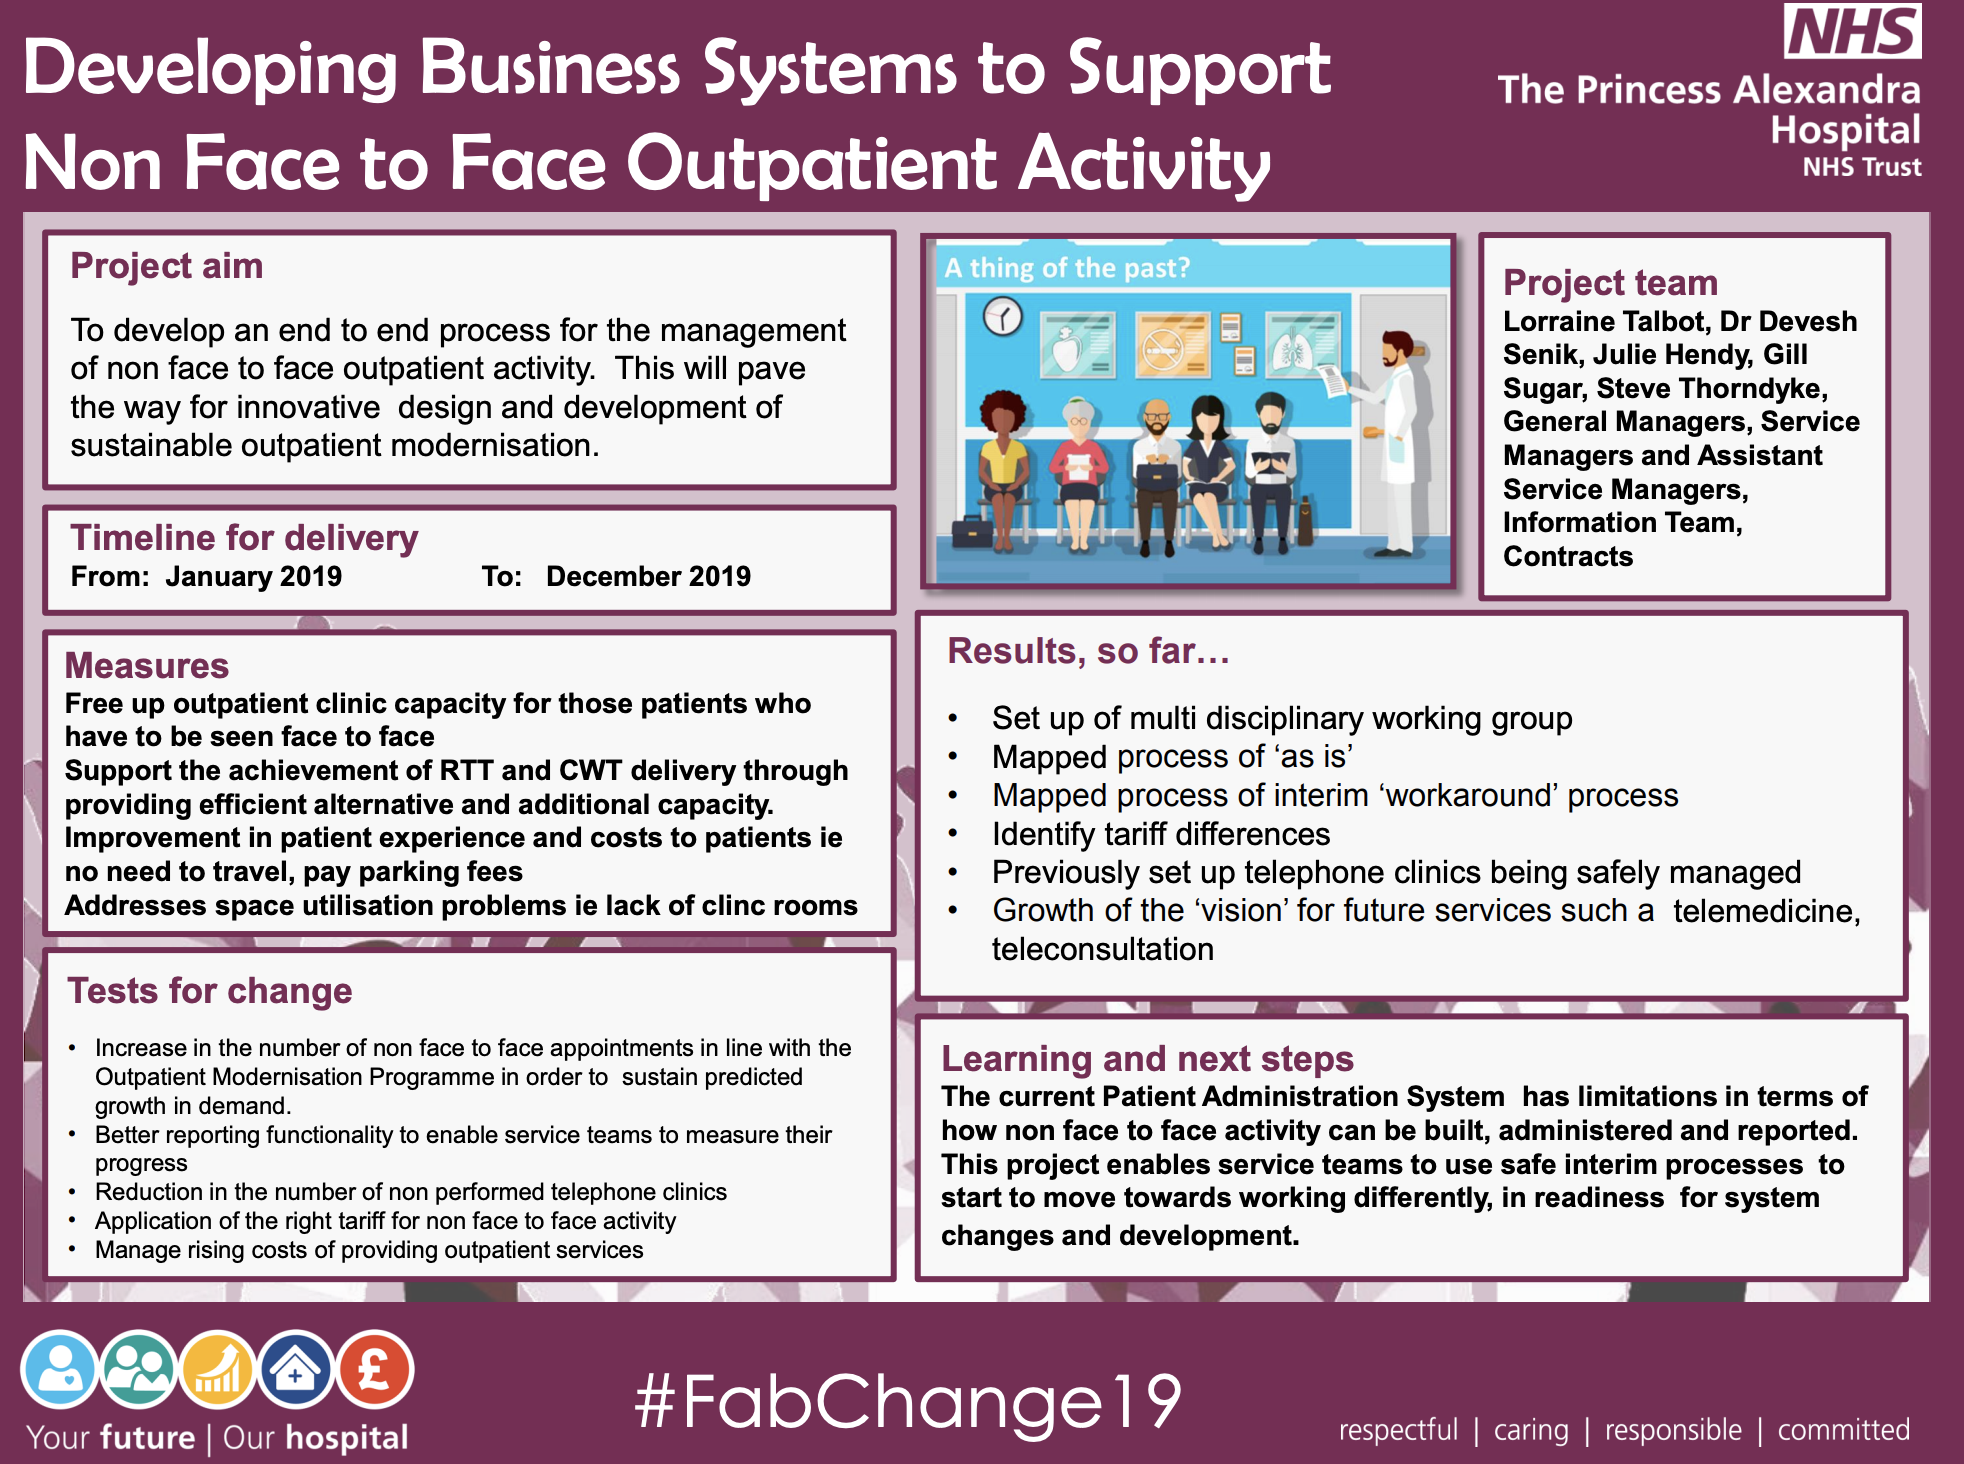 PAHT - Developing Business Systems to support Non Face to Face Outpatient Activity - @QualityFirstPAH featured image